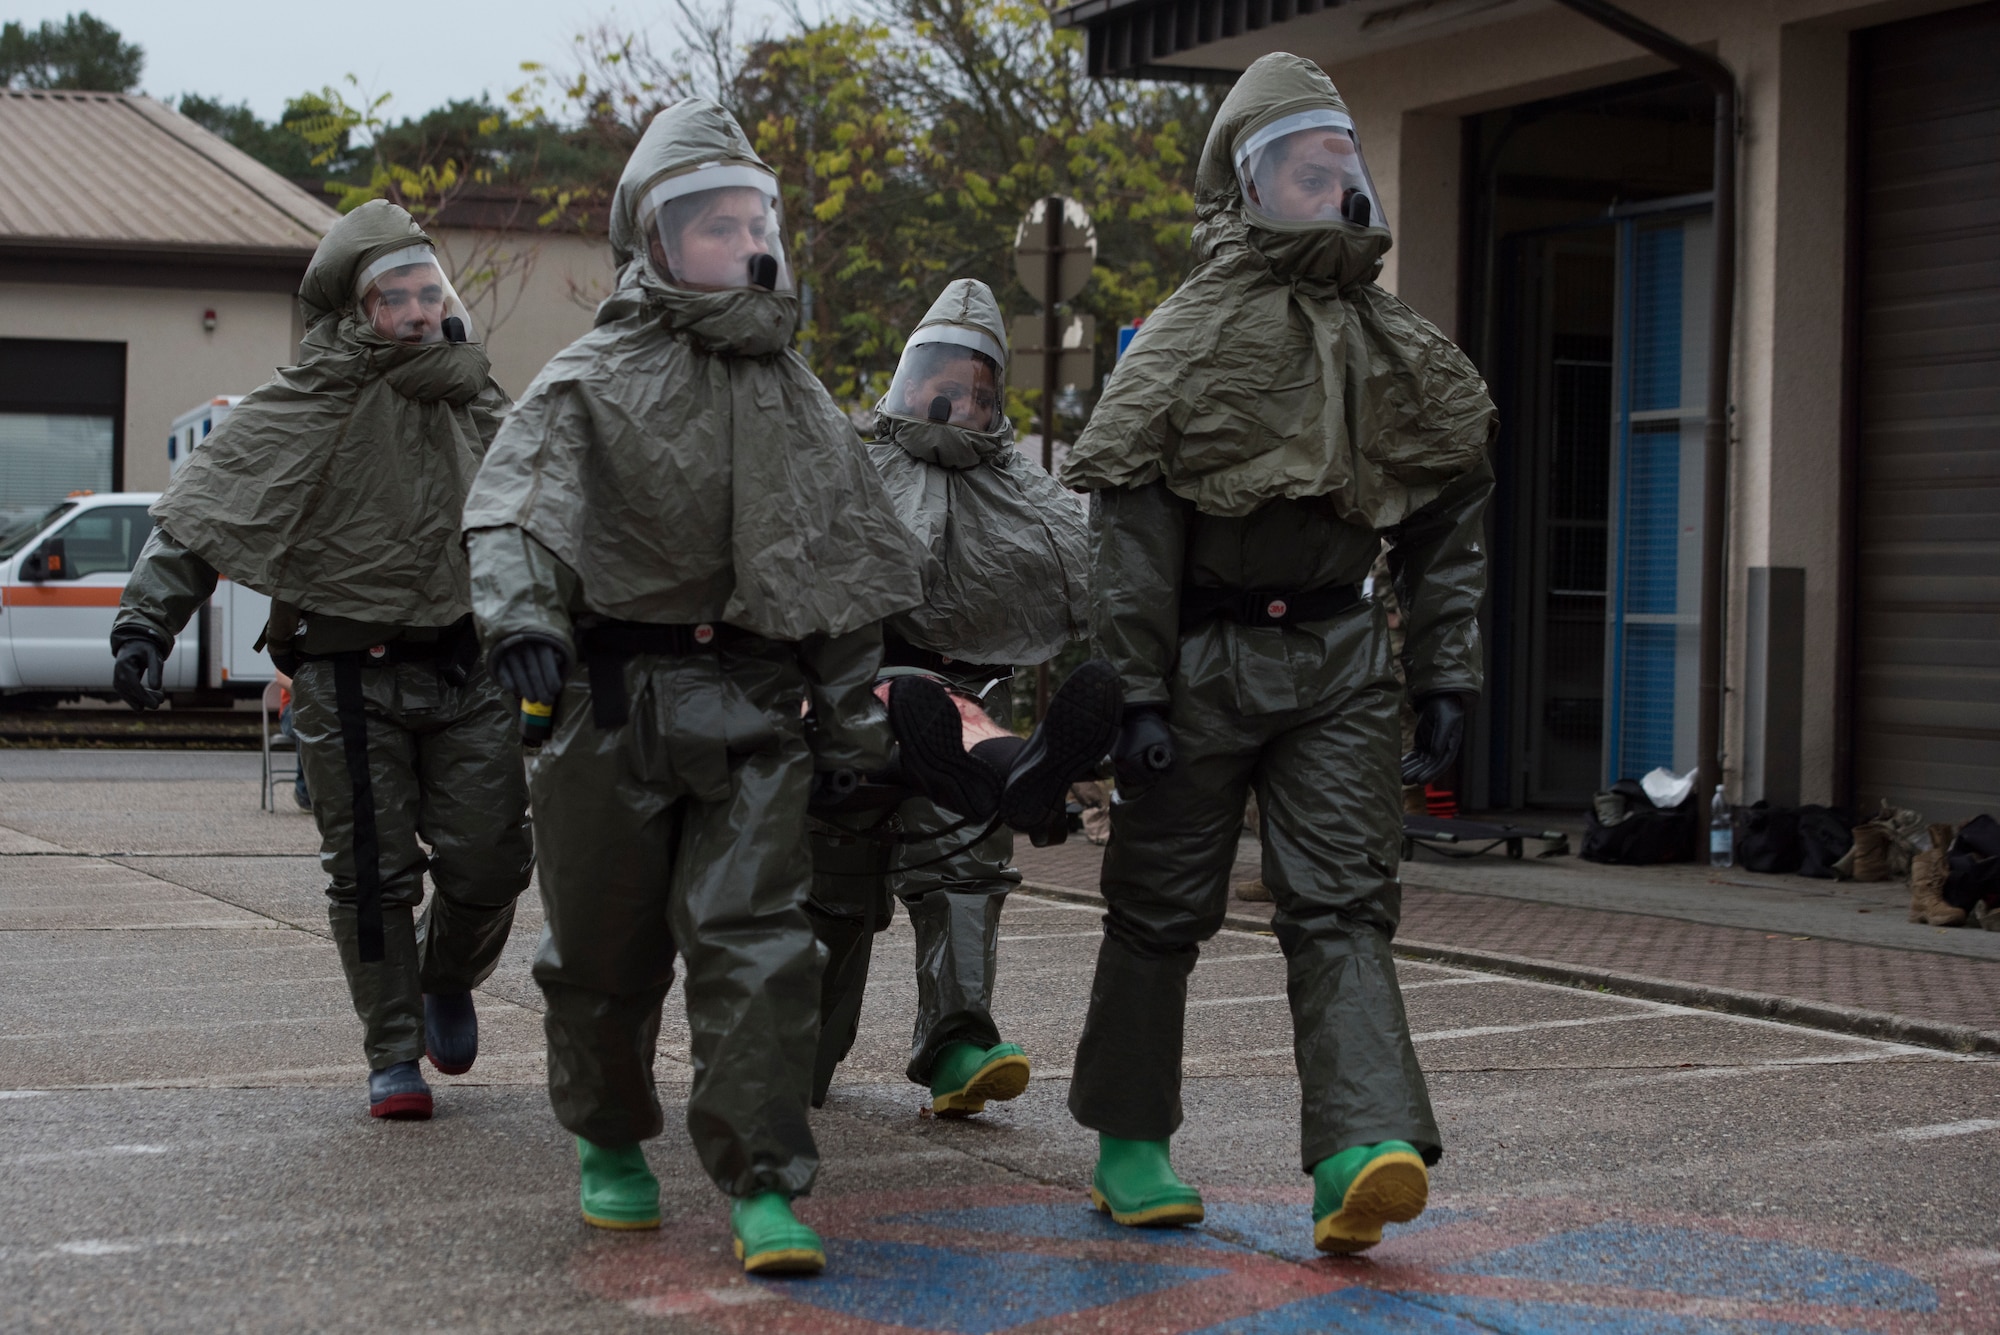 Medical Airmen transport a simulated victim to a decontamination tent.